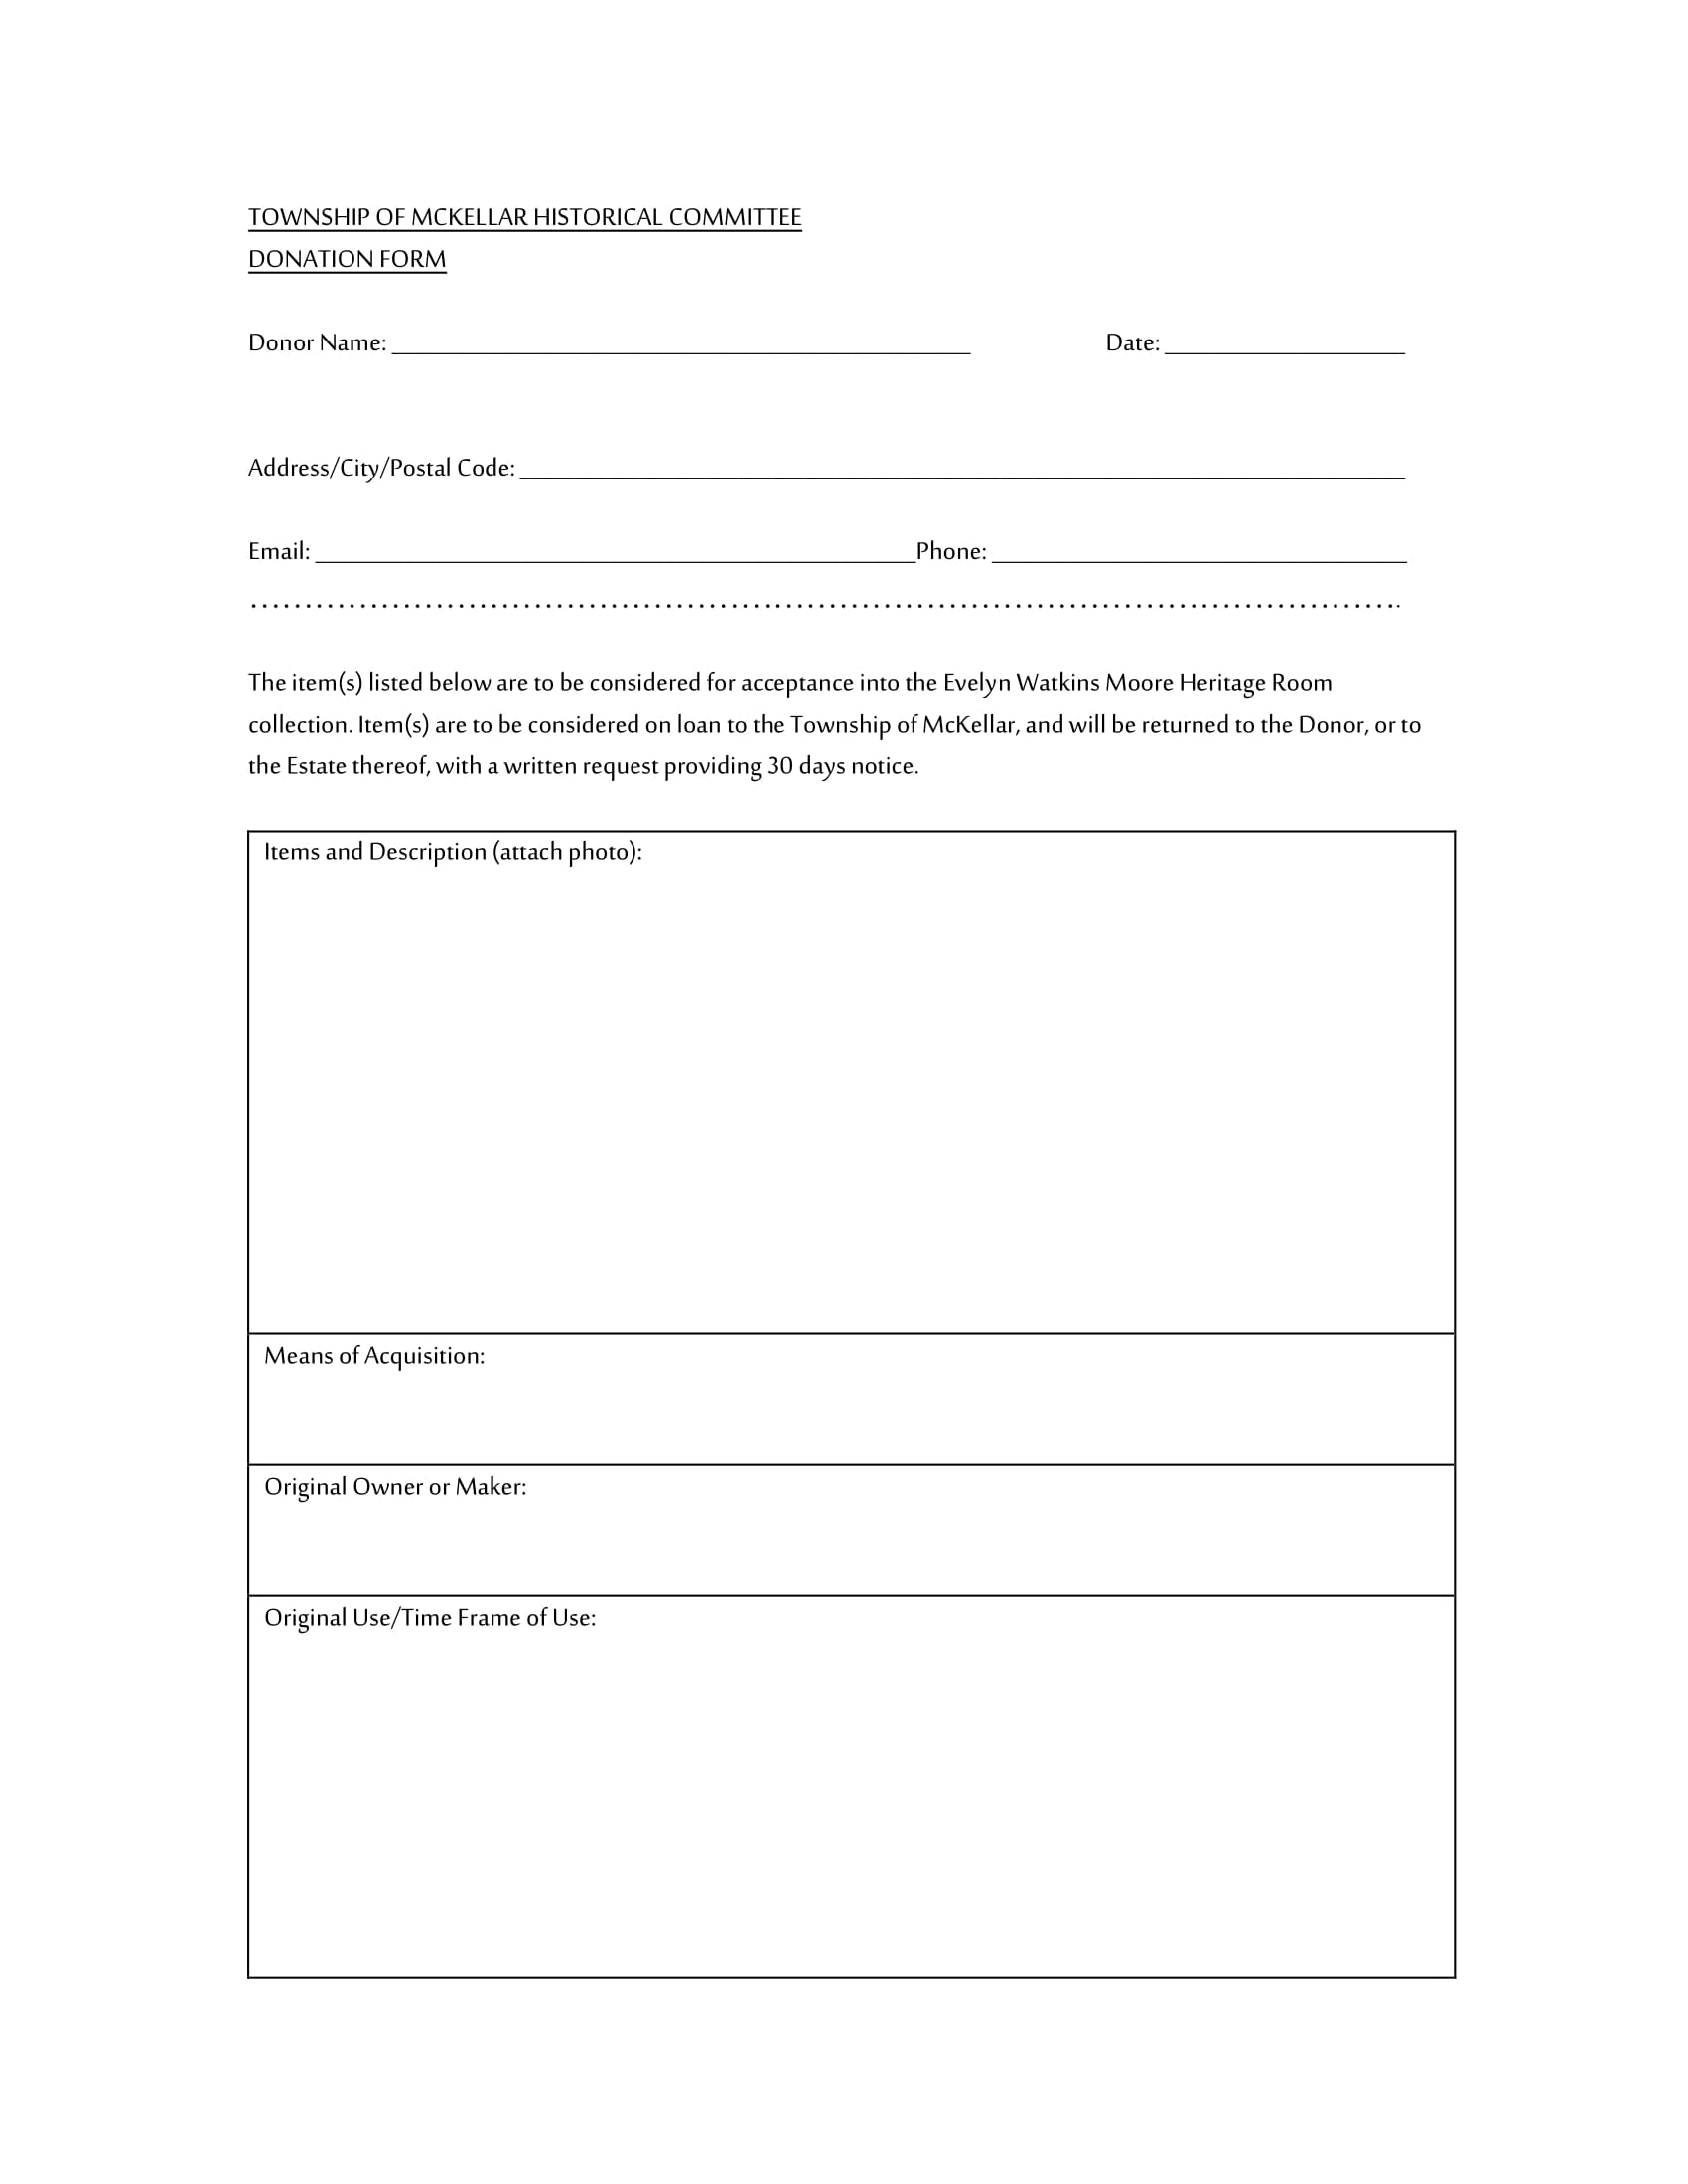 historical room donation form 1